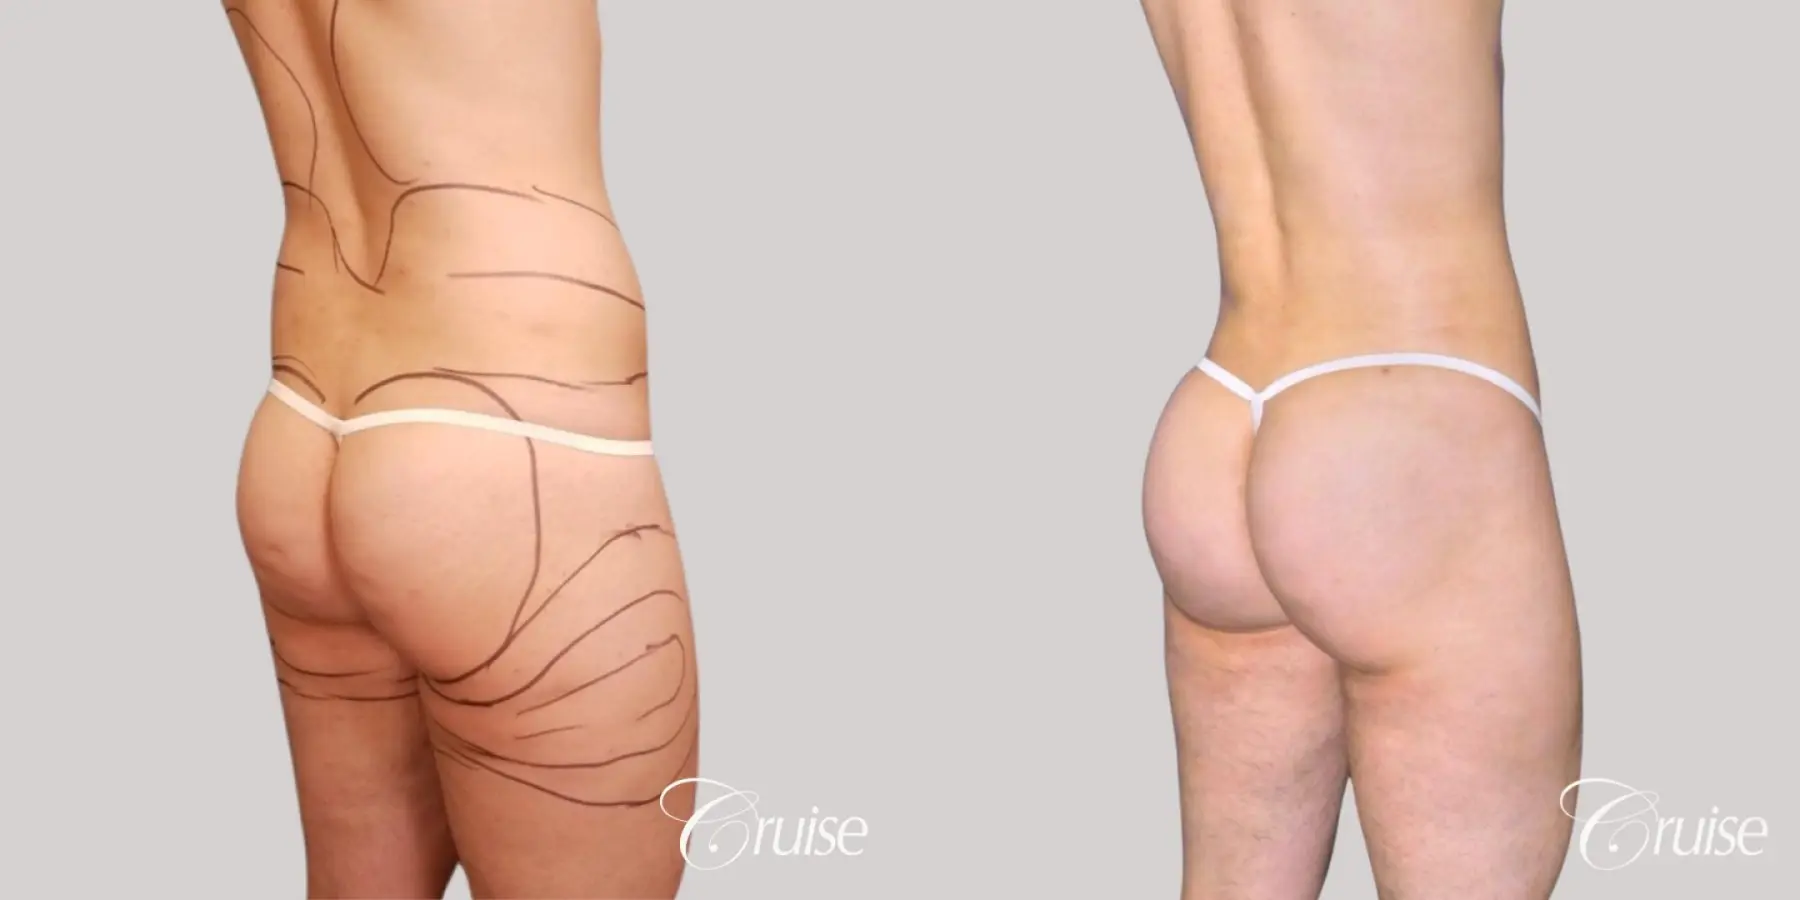 brazilian-butt-lift-before-and-after-x9OlsUNVOsxv_highres